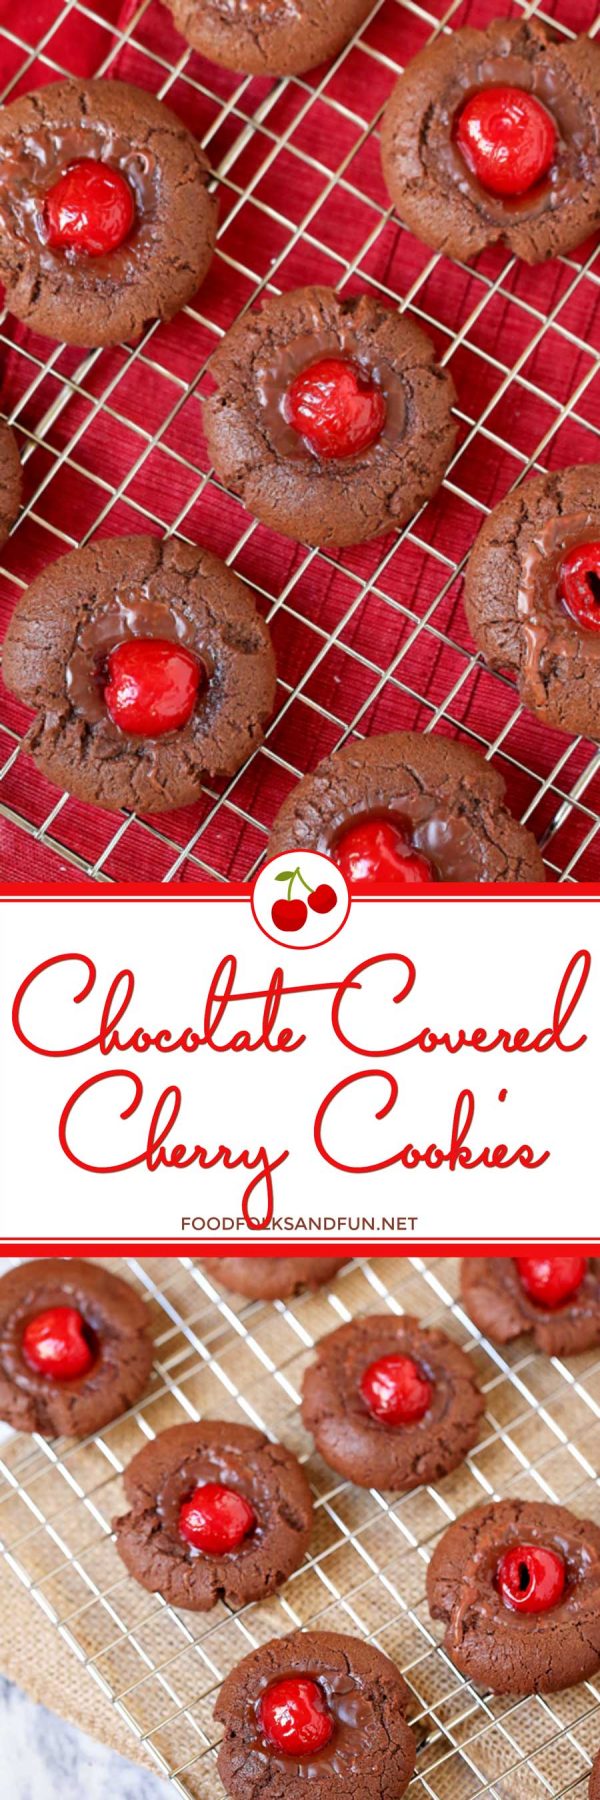 Best Chocolate Covered Cherry Cookies